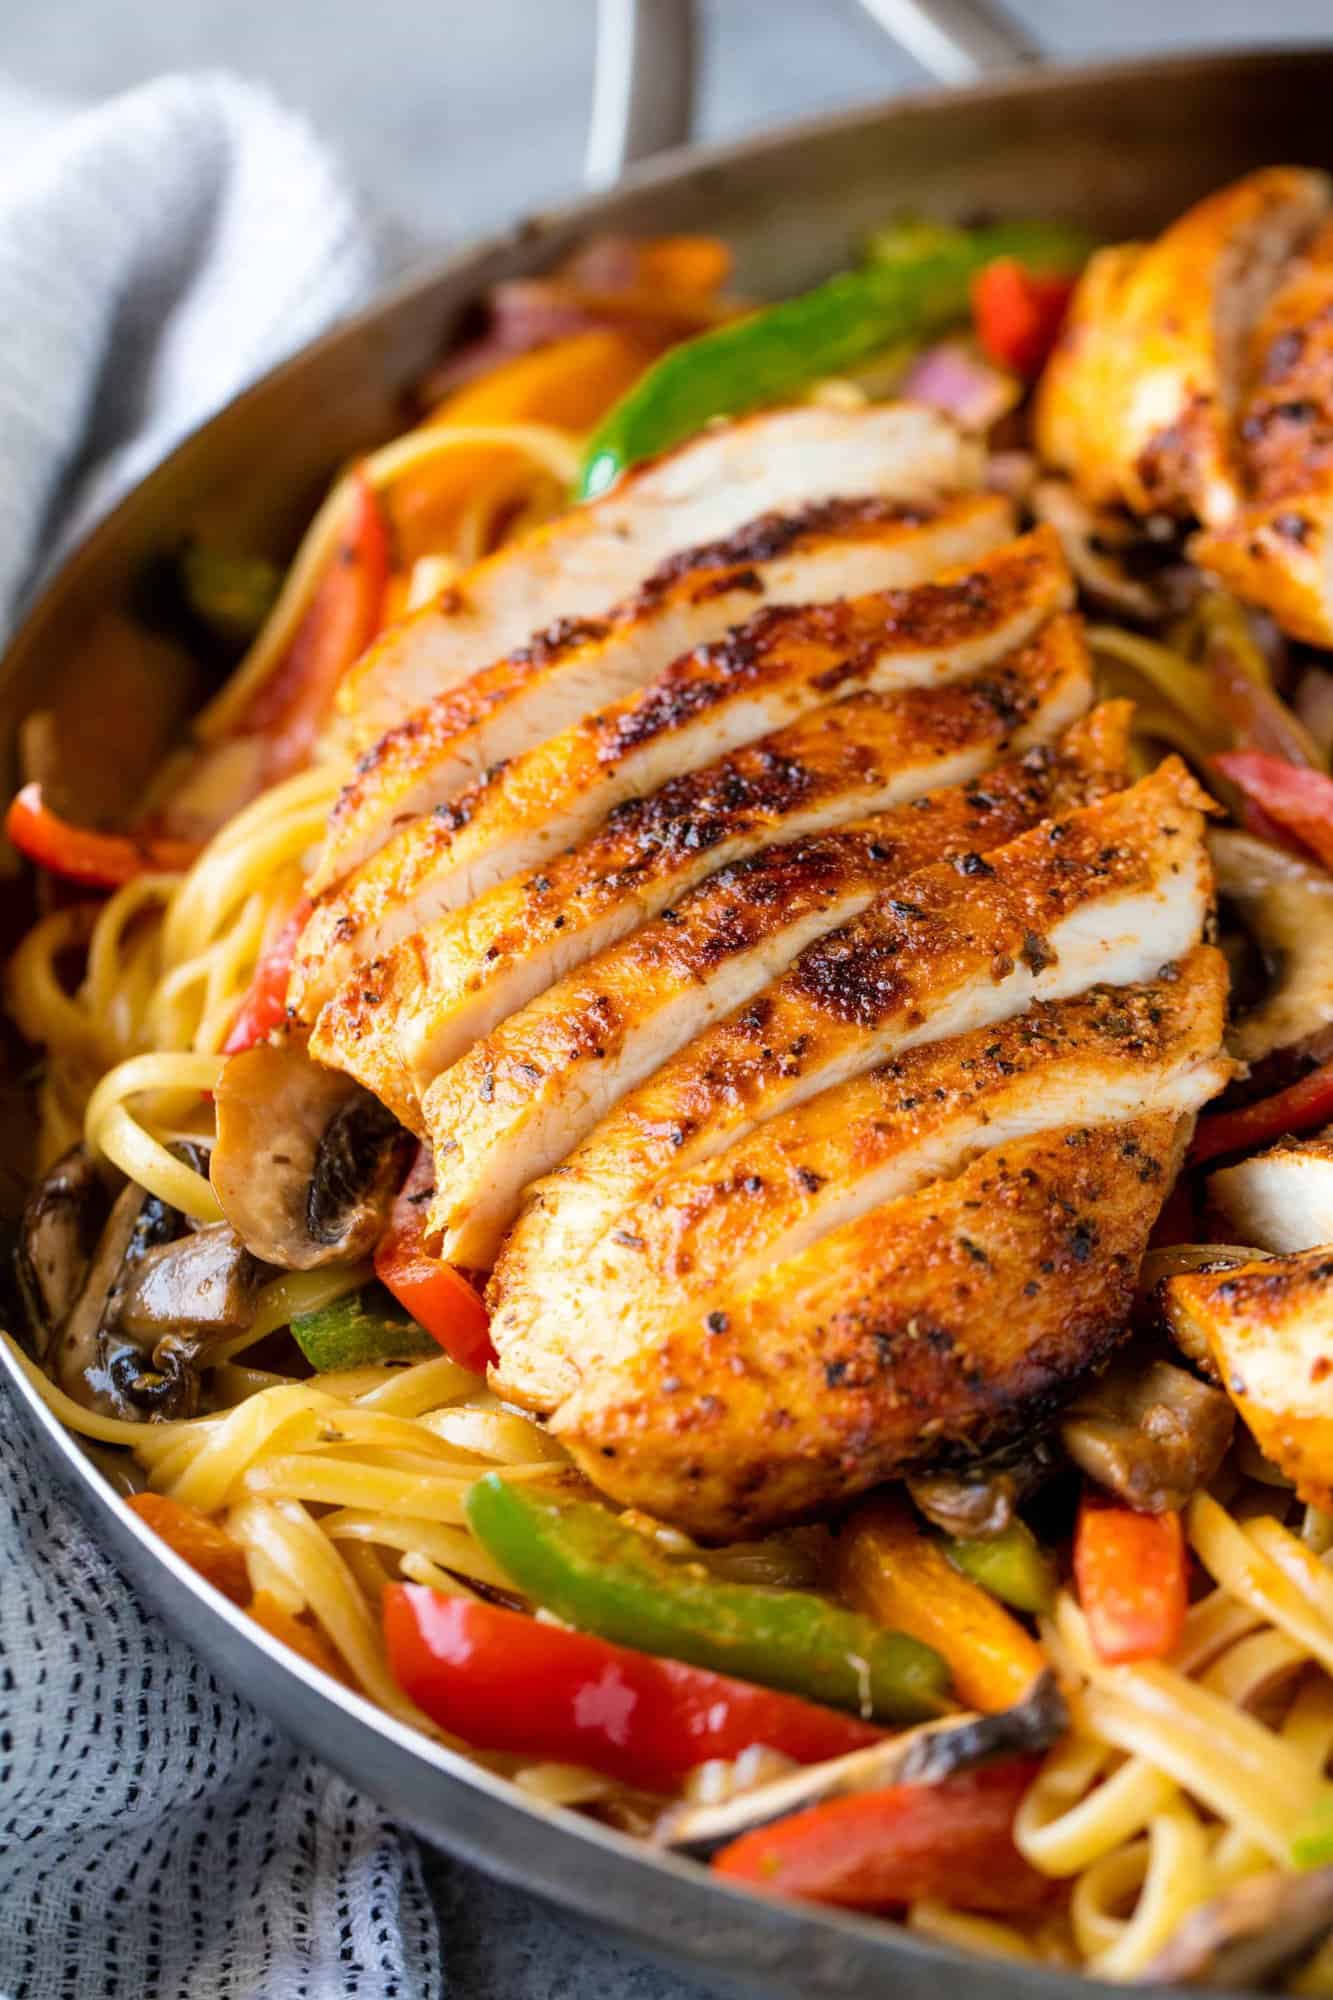 Creamy Cajun Chicken Pasta is the perfect family meal. Juicy cajun-spiced chicken is served over a bed of creamy pasta that's packed full of sautéed veggies.